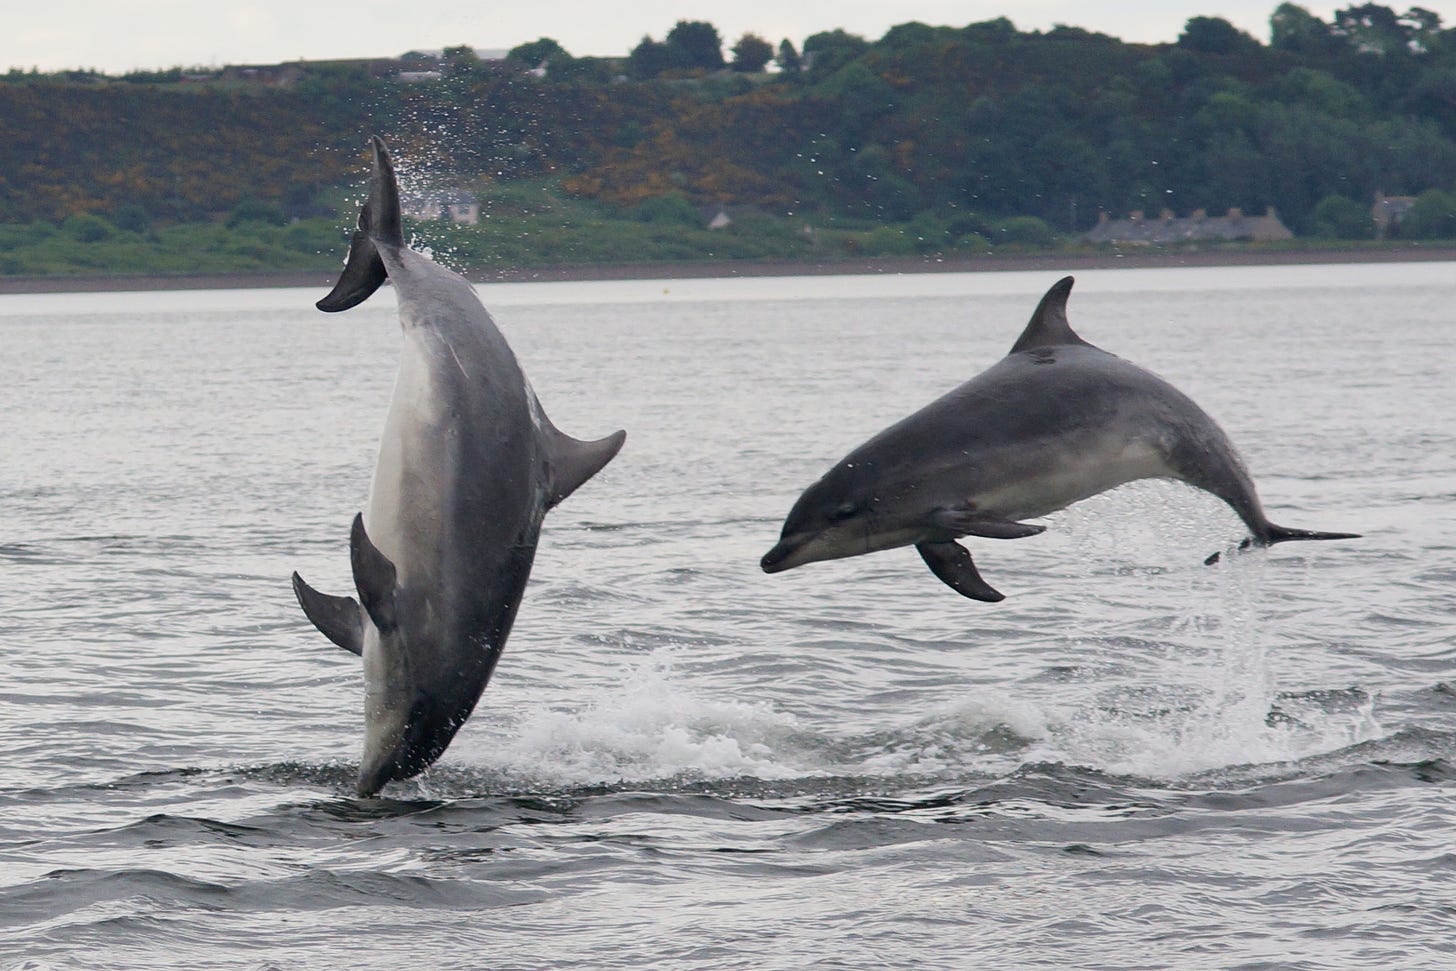 Bottlenose dolphins doing a double breach at Chanonry Point (my copyright)